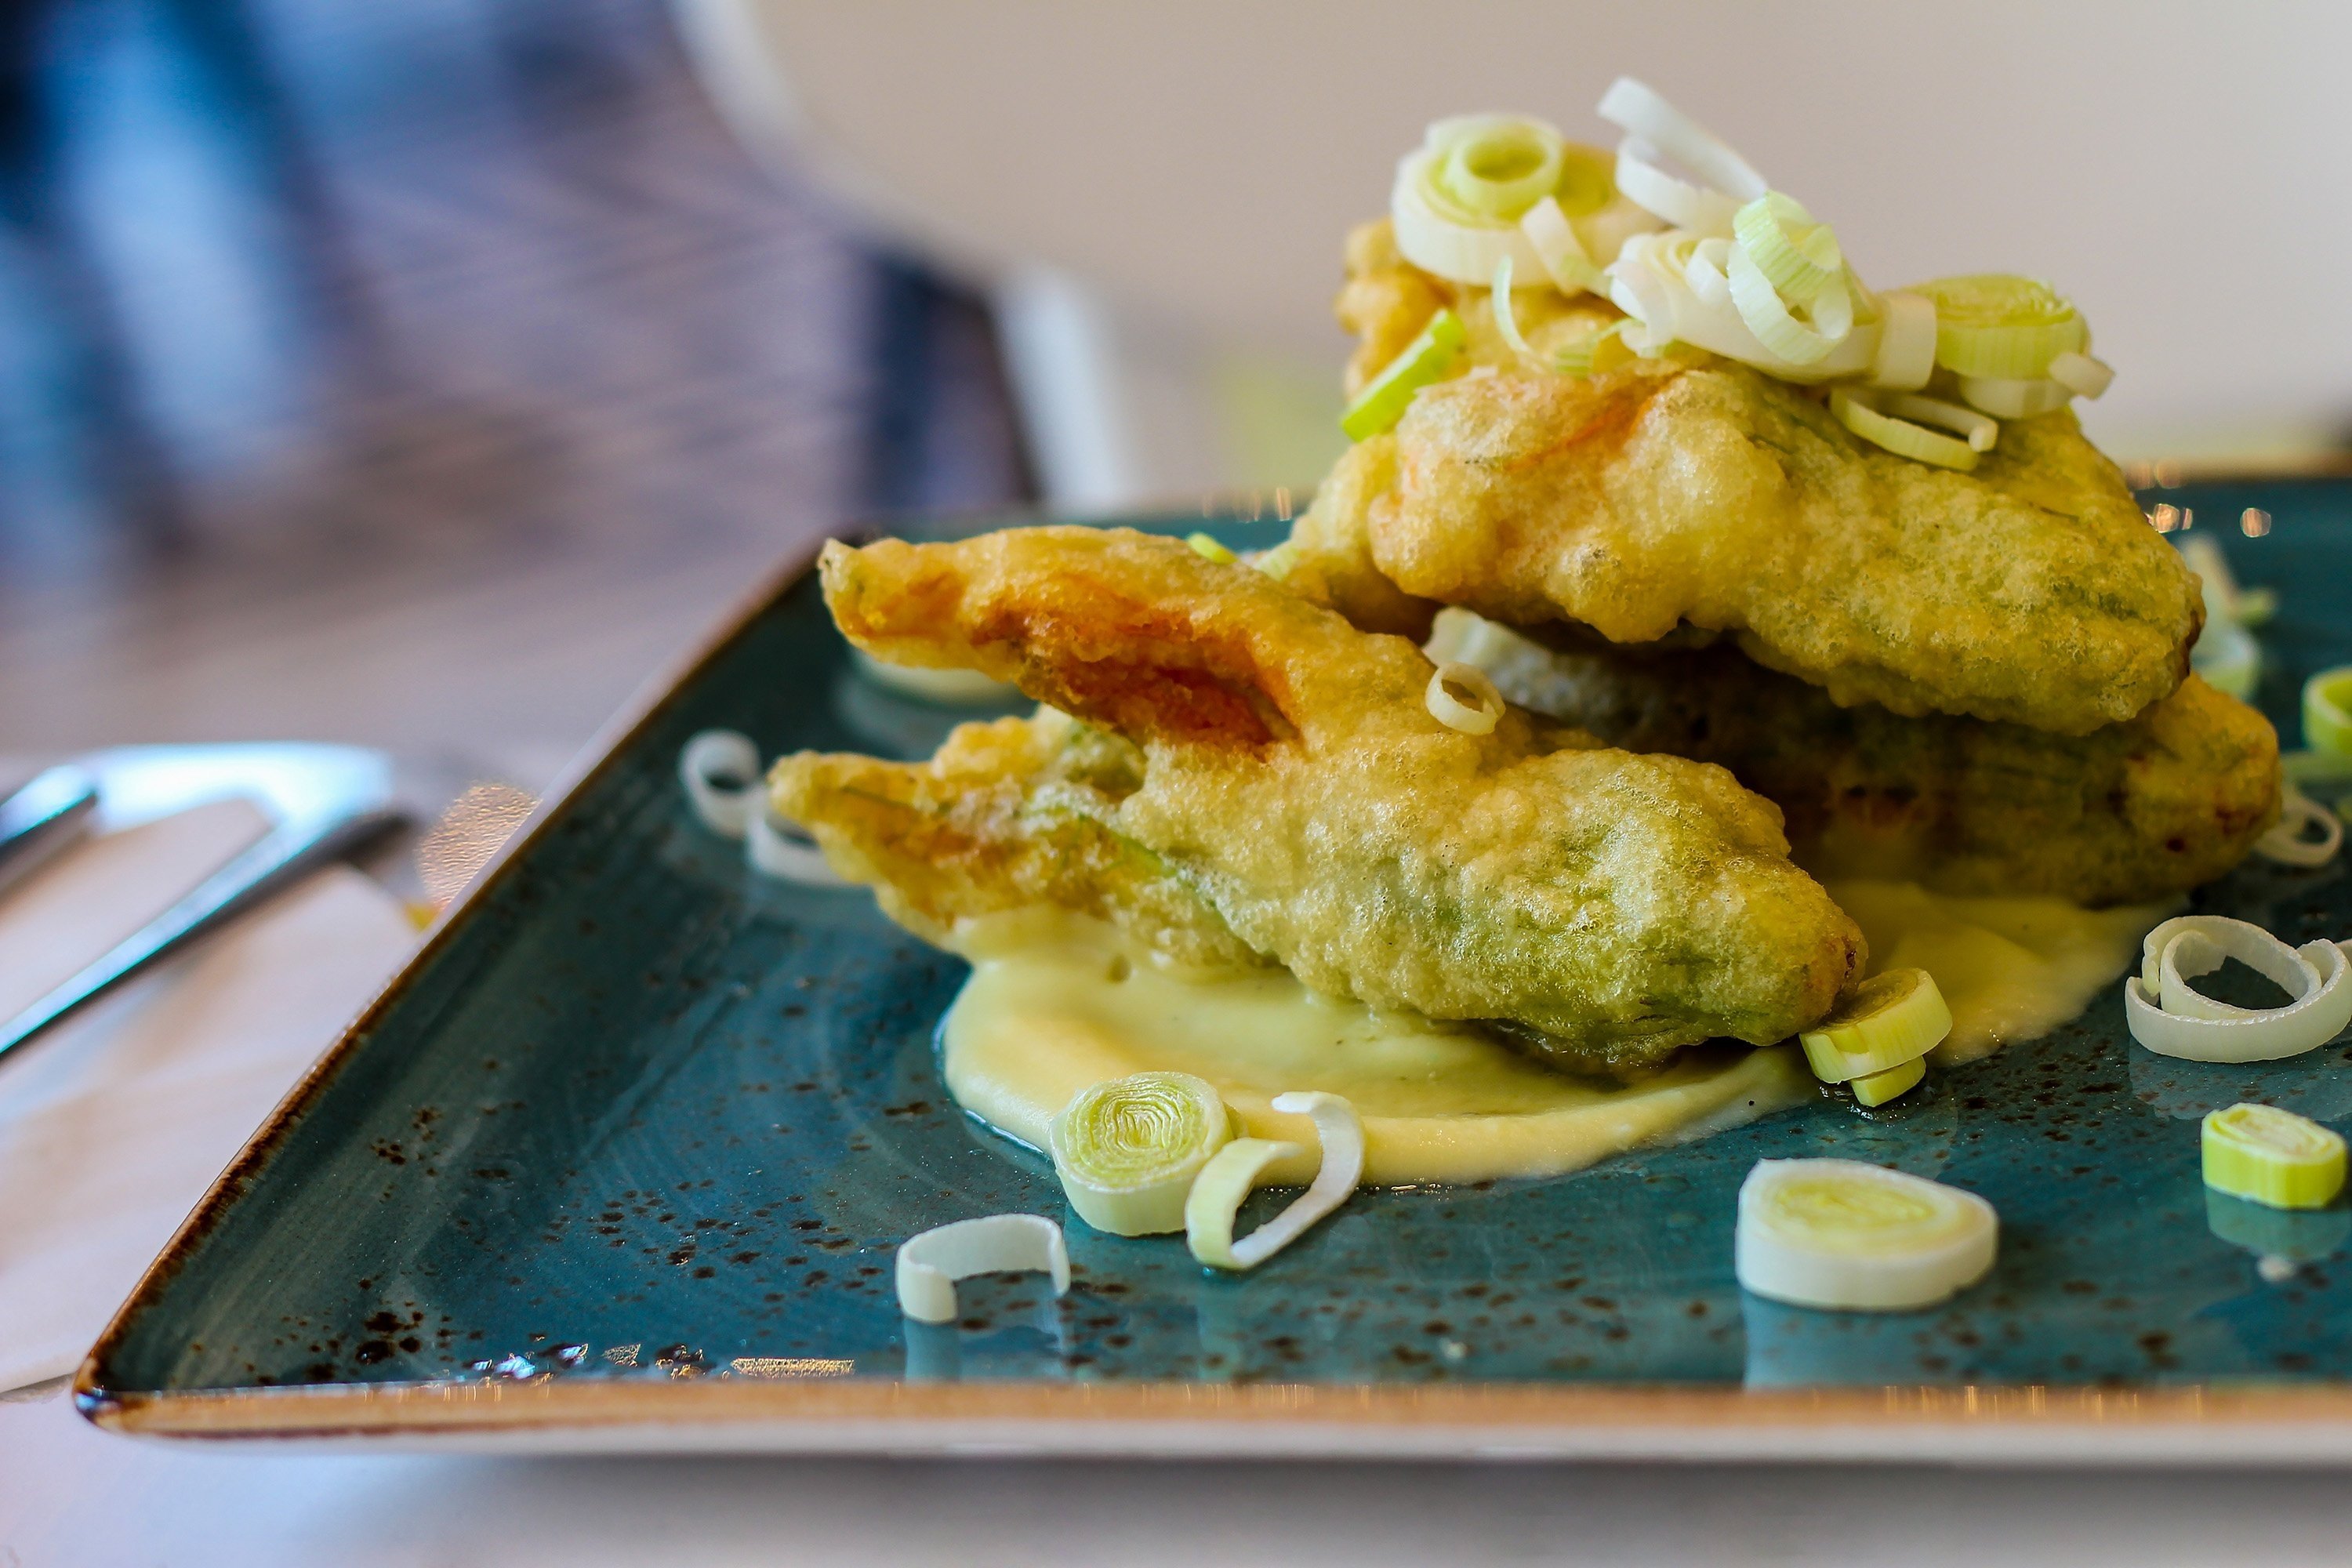 Hamsi leek fritters are an easy way to incorporate more vegetables into your diet. (Shutterstock)